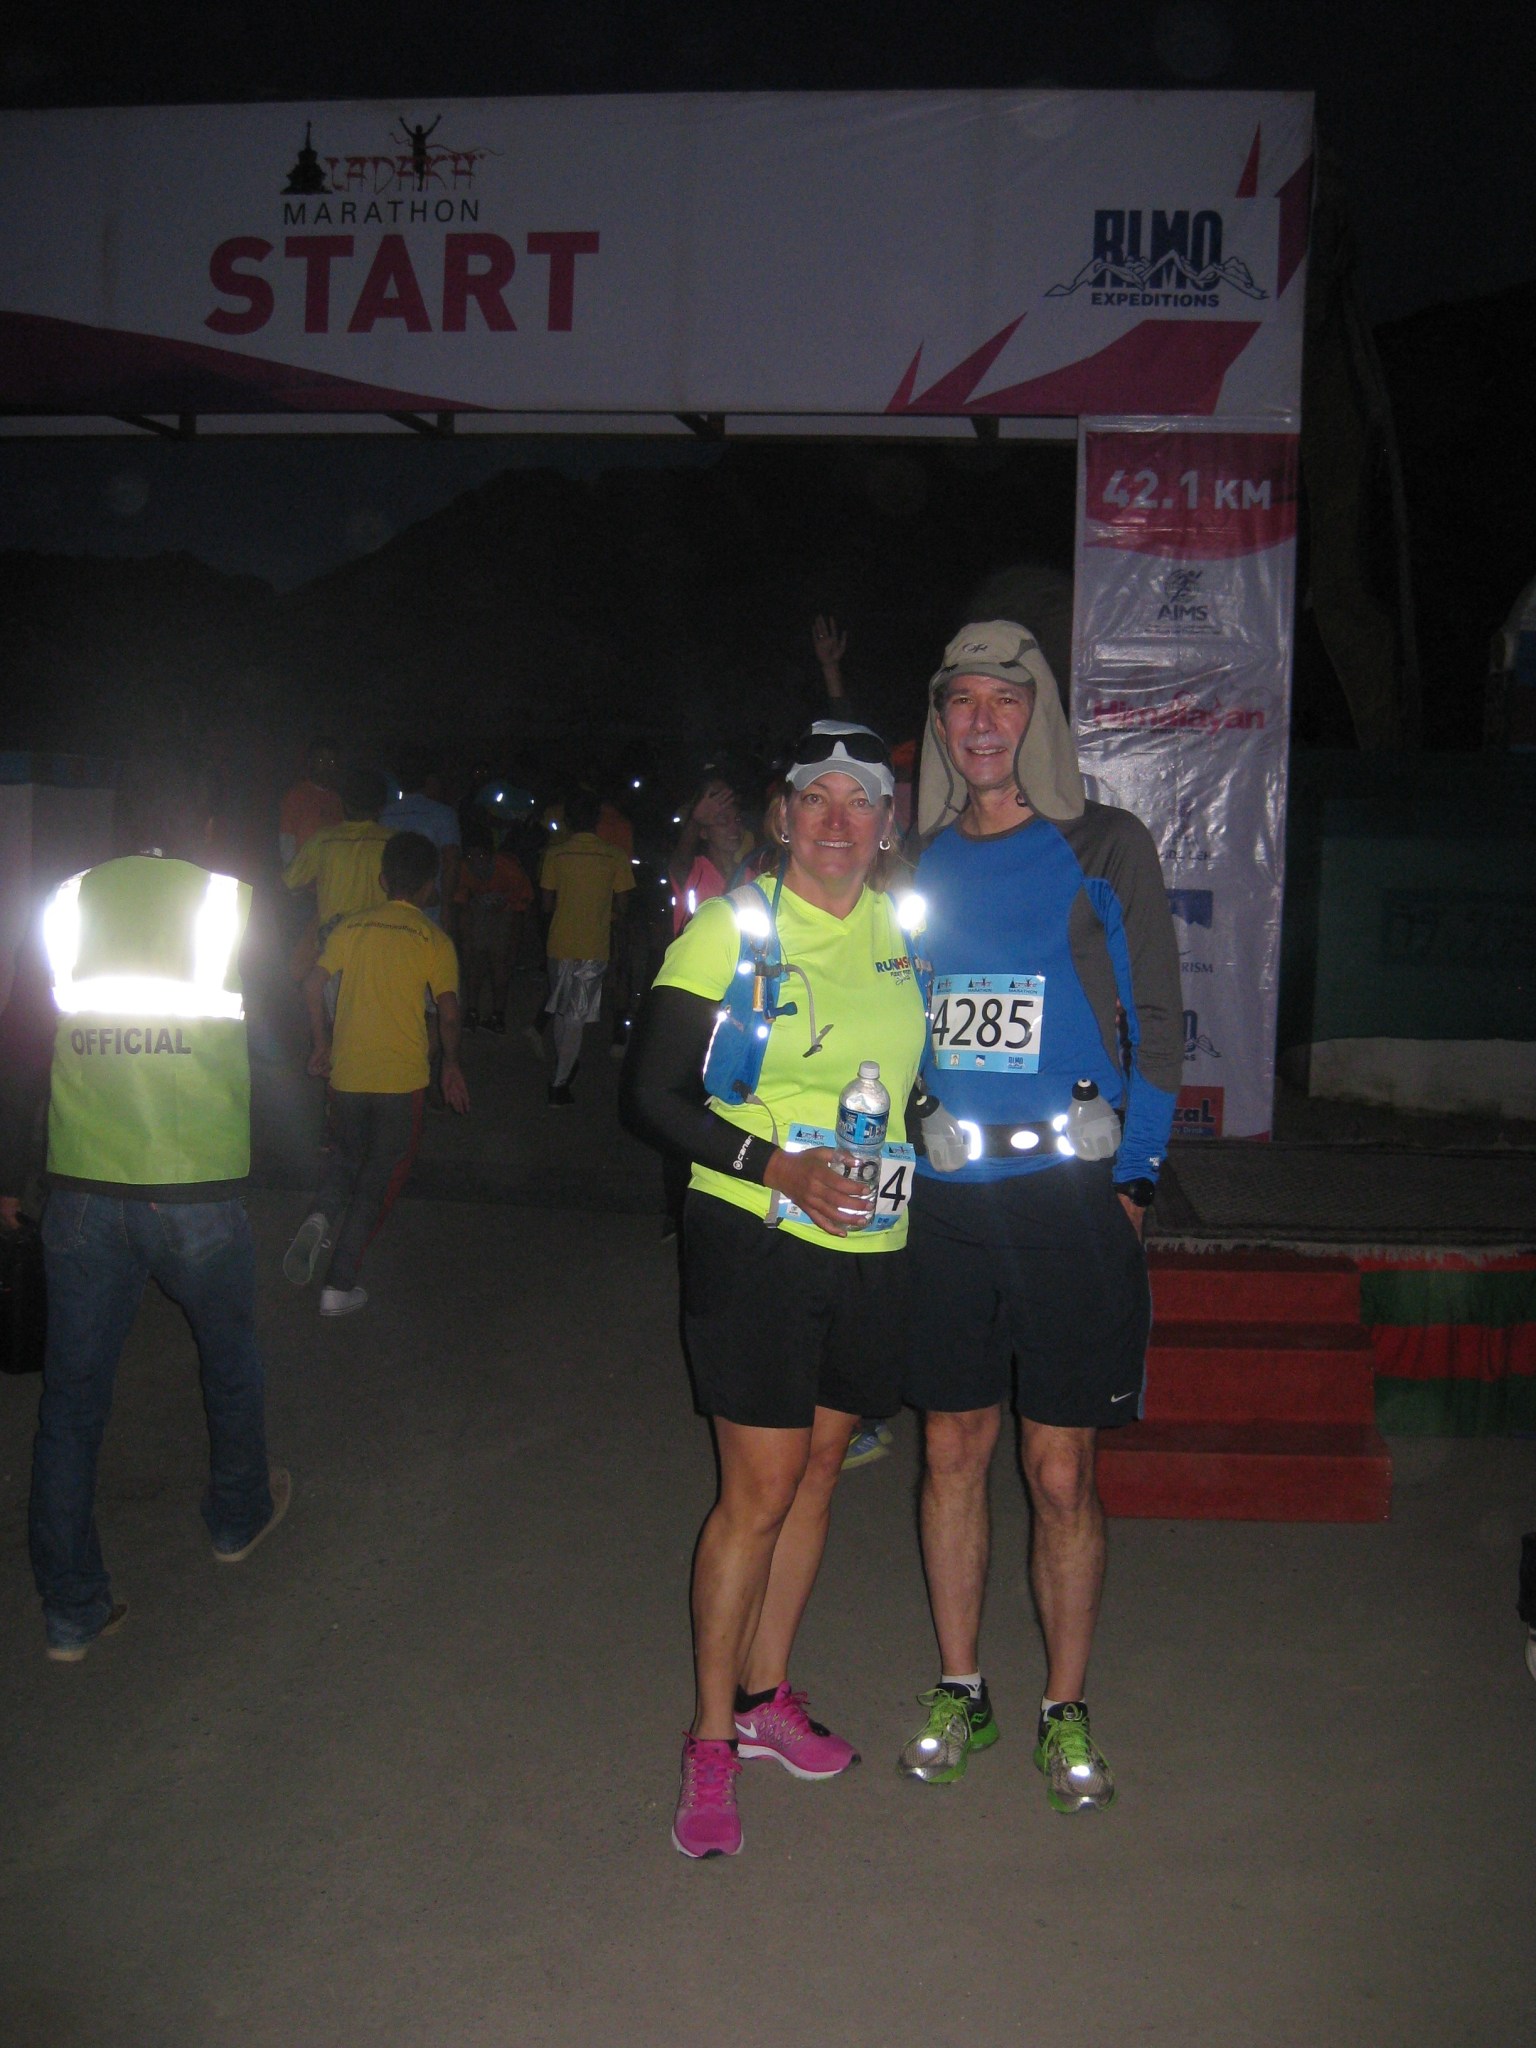 Angie Jackman, left, and her spouse Paul McConnaughey, moments before starting the Ladahk Marathon in India.